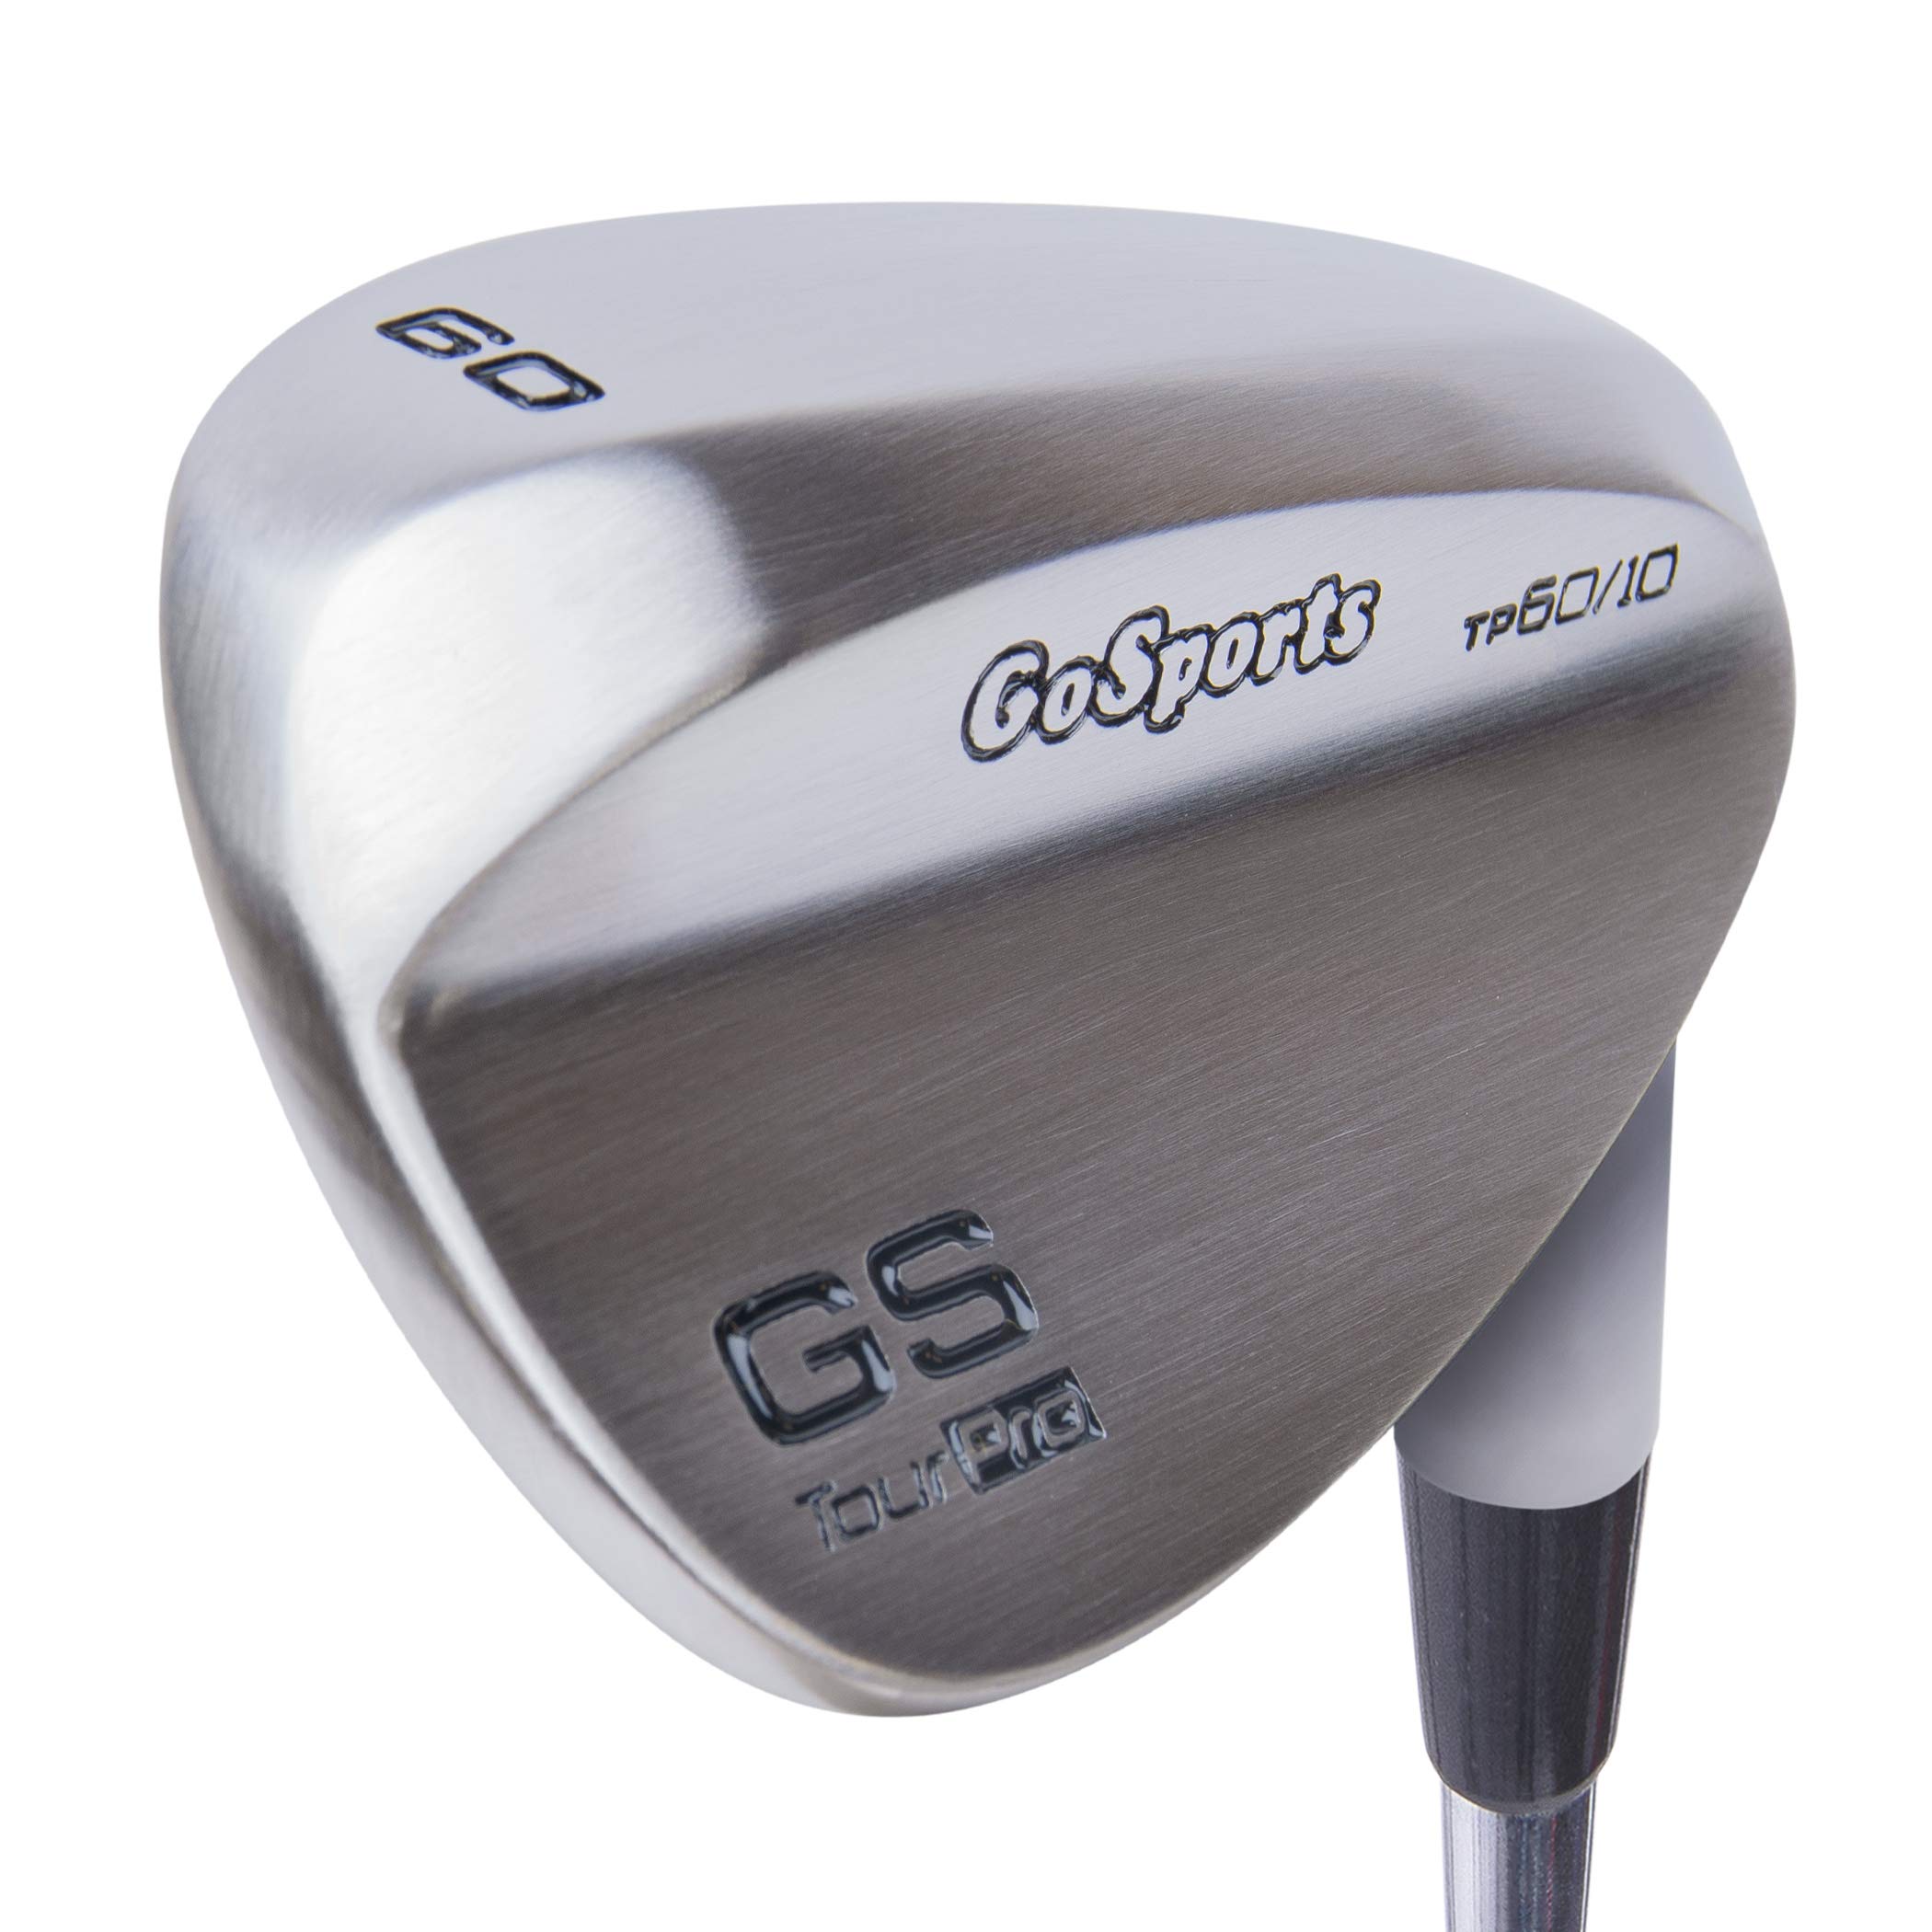 GoSports Tour Pro Golf Wedges – 52 Gap Wedge, 56 Sand Wedge and 60 Lob Wedge in Satin or Black Finish (Right Handed)